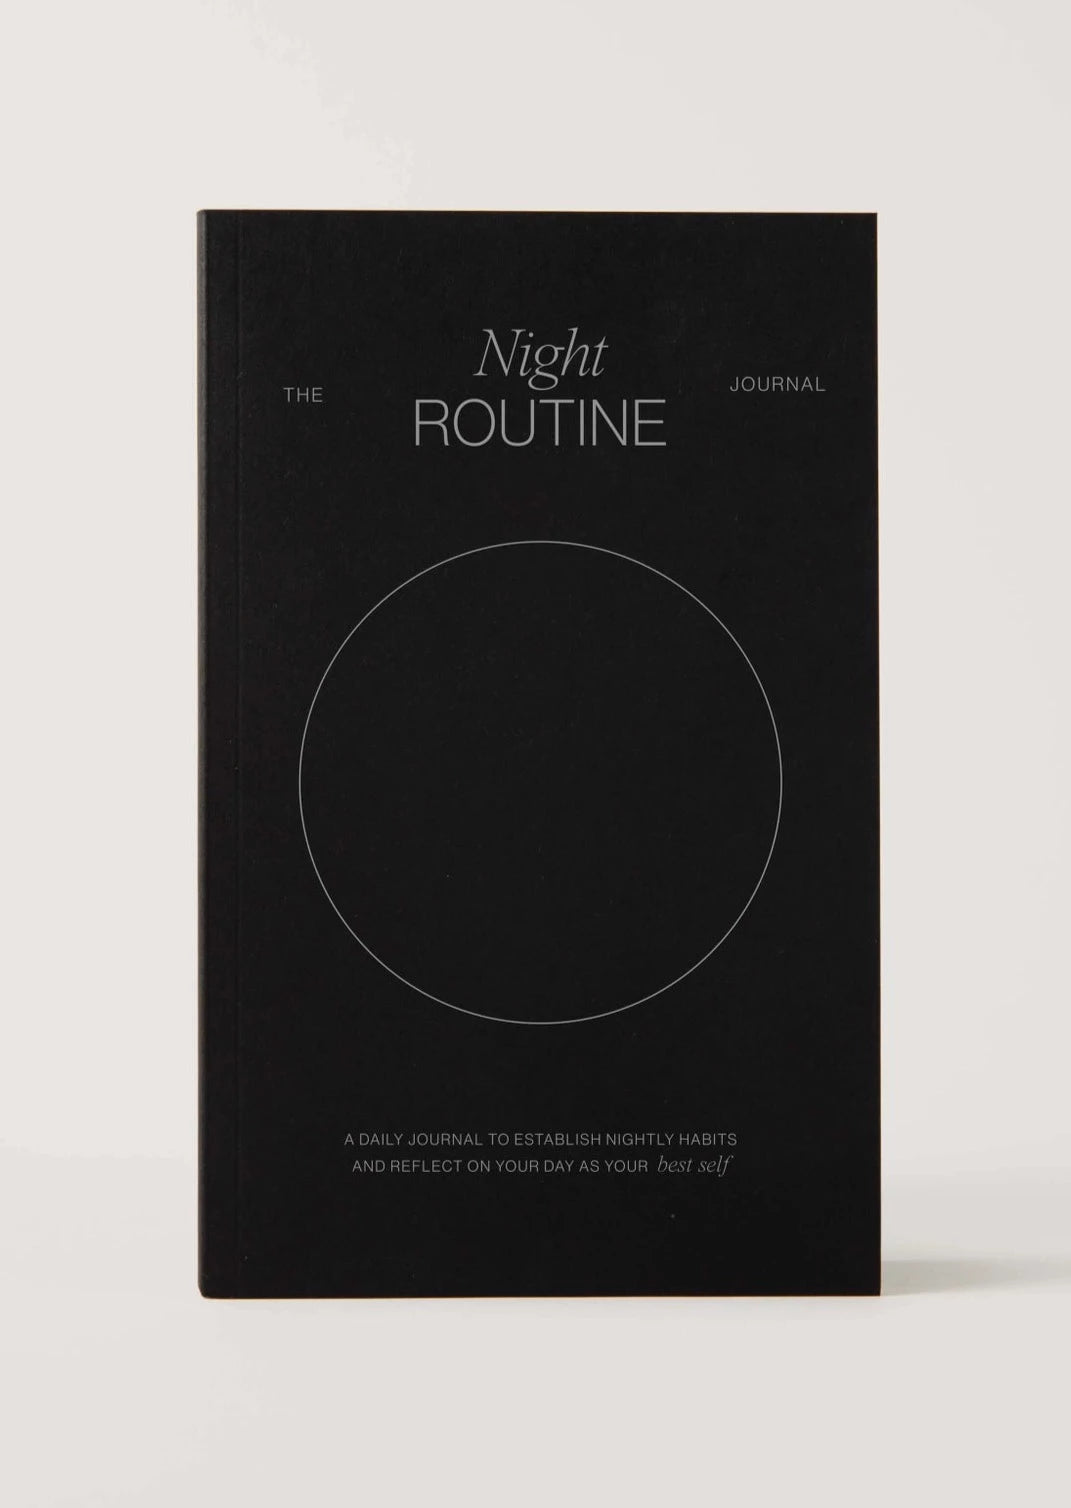 Night Routine Journal - A beautifully designed journal to help you unwind and reflect at the end of your day. With thoughtful prompts and space for personal notes, this journal is perfect for cultivating mindfulness and self-care. Available in various elegant designs, it's a wonderful companion for your nighttime rituals. Start your journey to a more peaceful evening routine with this exquisite journal. This journal is from Wilde House Papers and sold at Blackbird Designs.